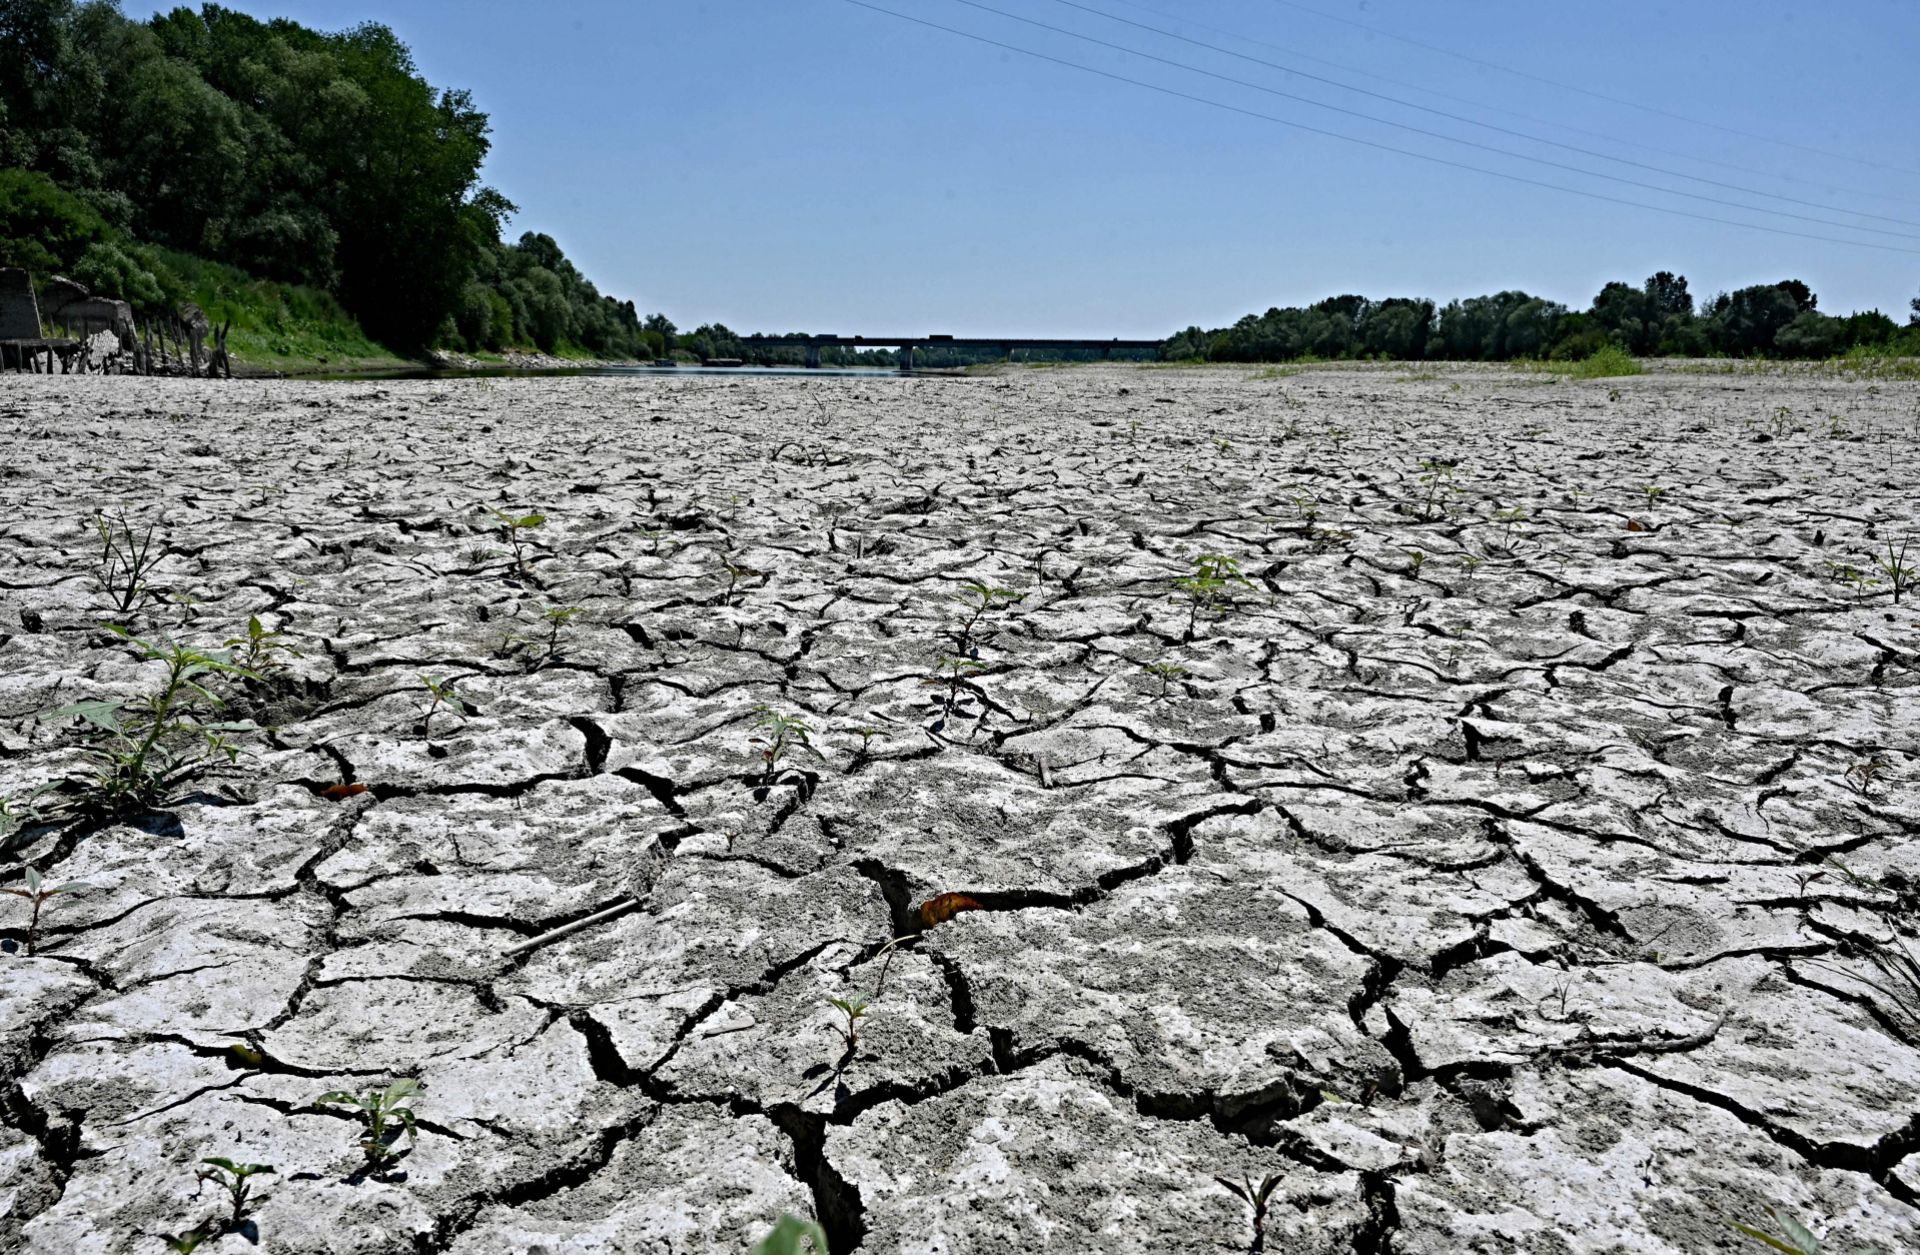 A photo taken on July 5, 2022, shows the dried-up river bed of the Po River in Italy's Veneto region. Water levels in Italy's largest river have reached record lows amid a severe drought.